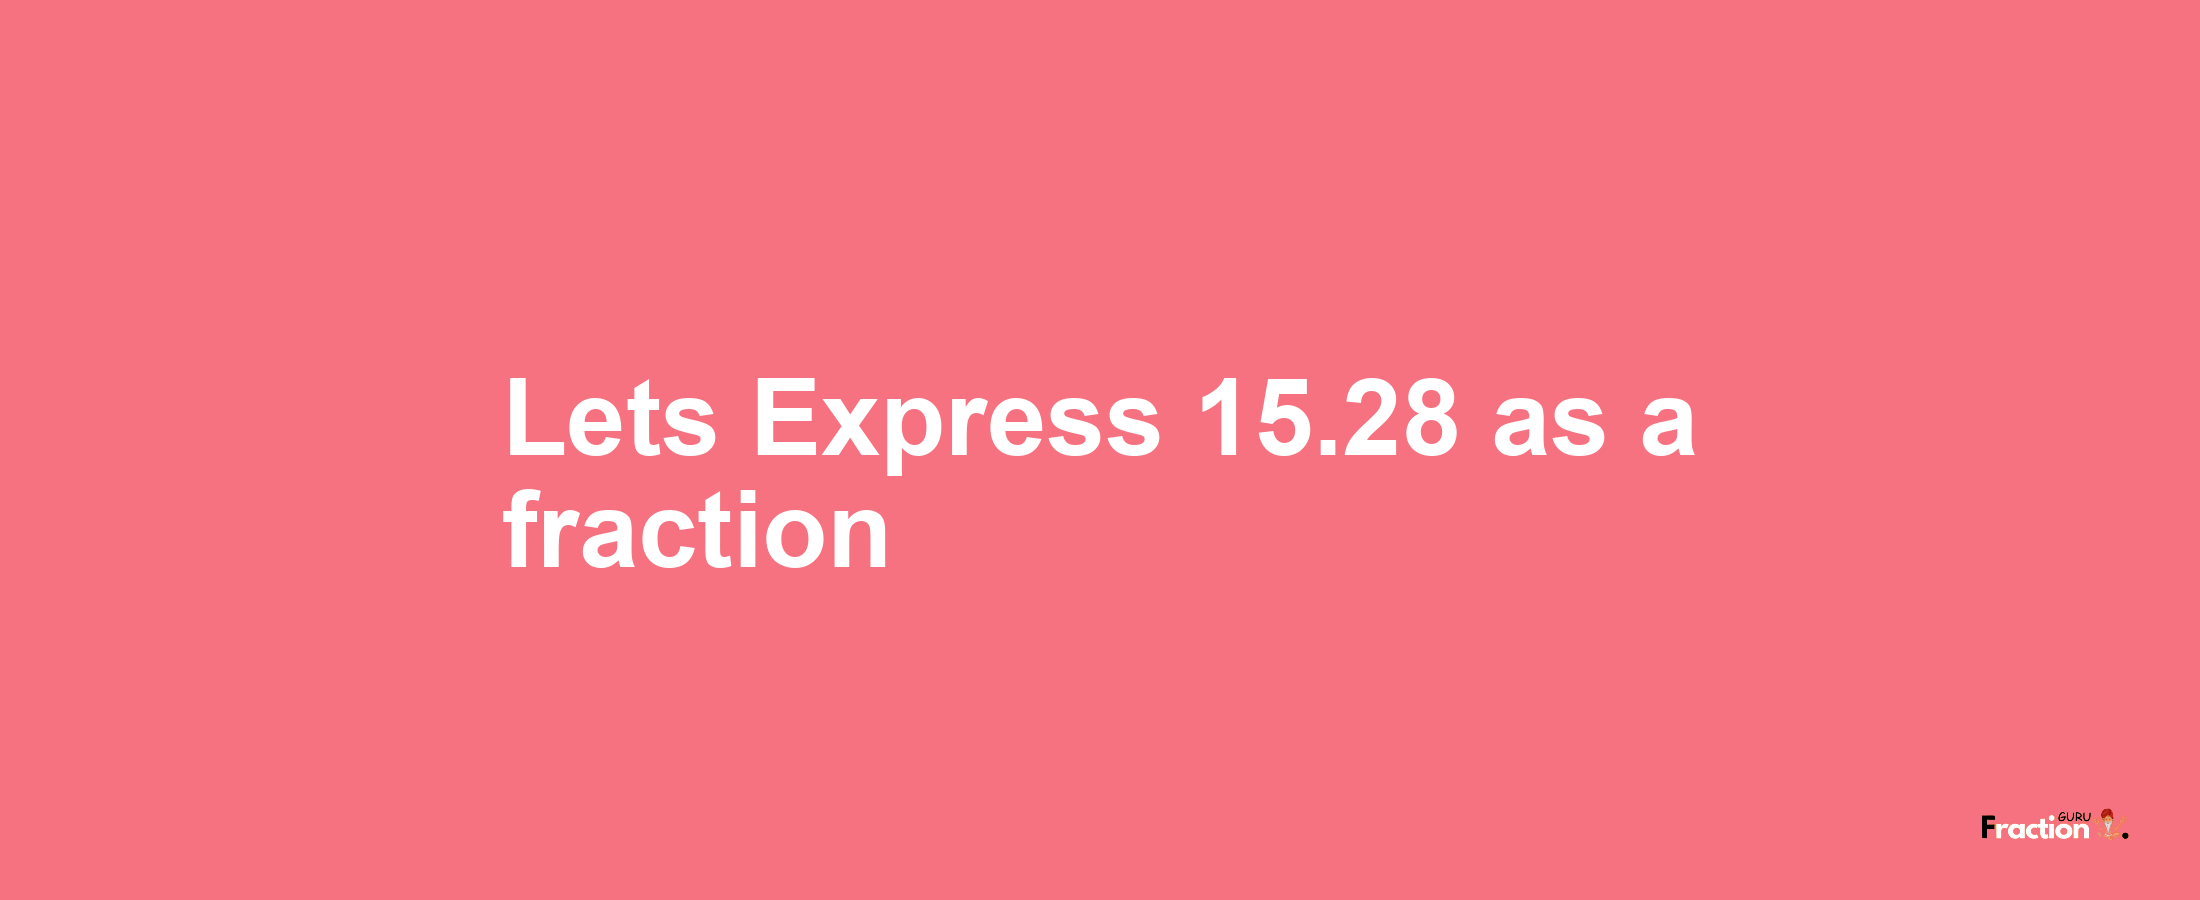 Lets Express 15.28 as afraction